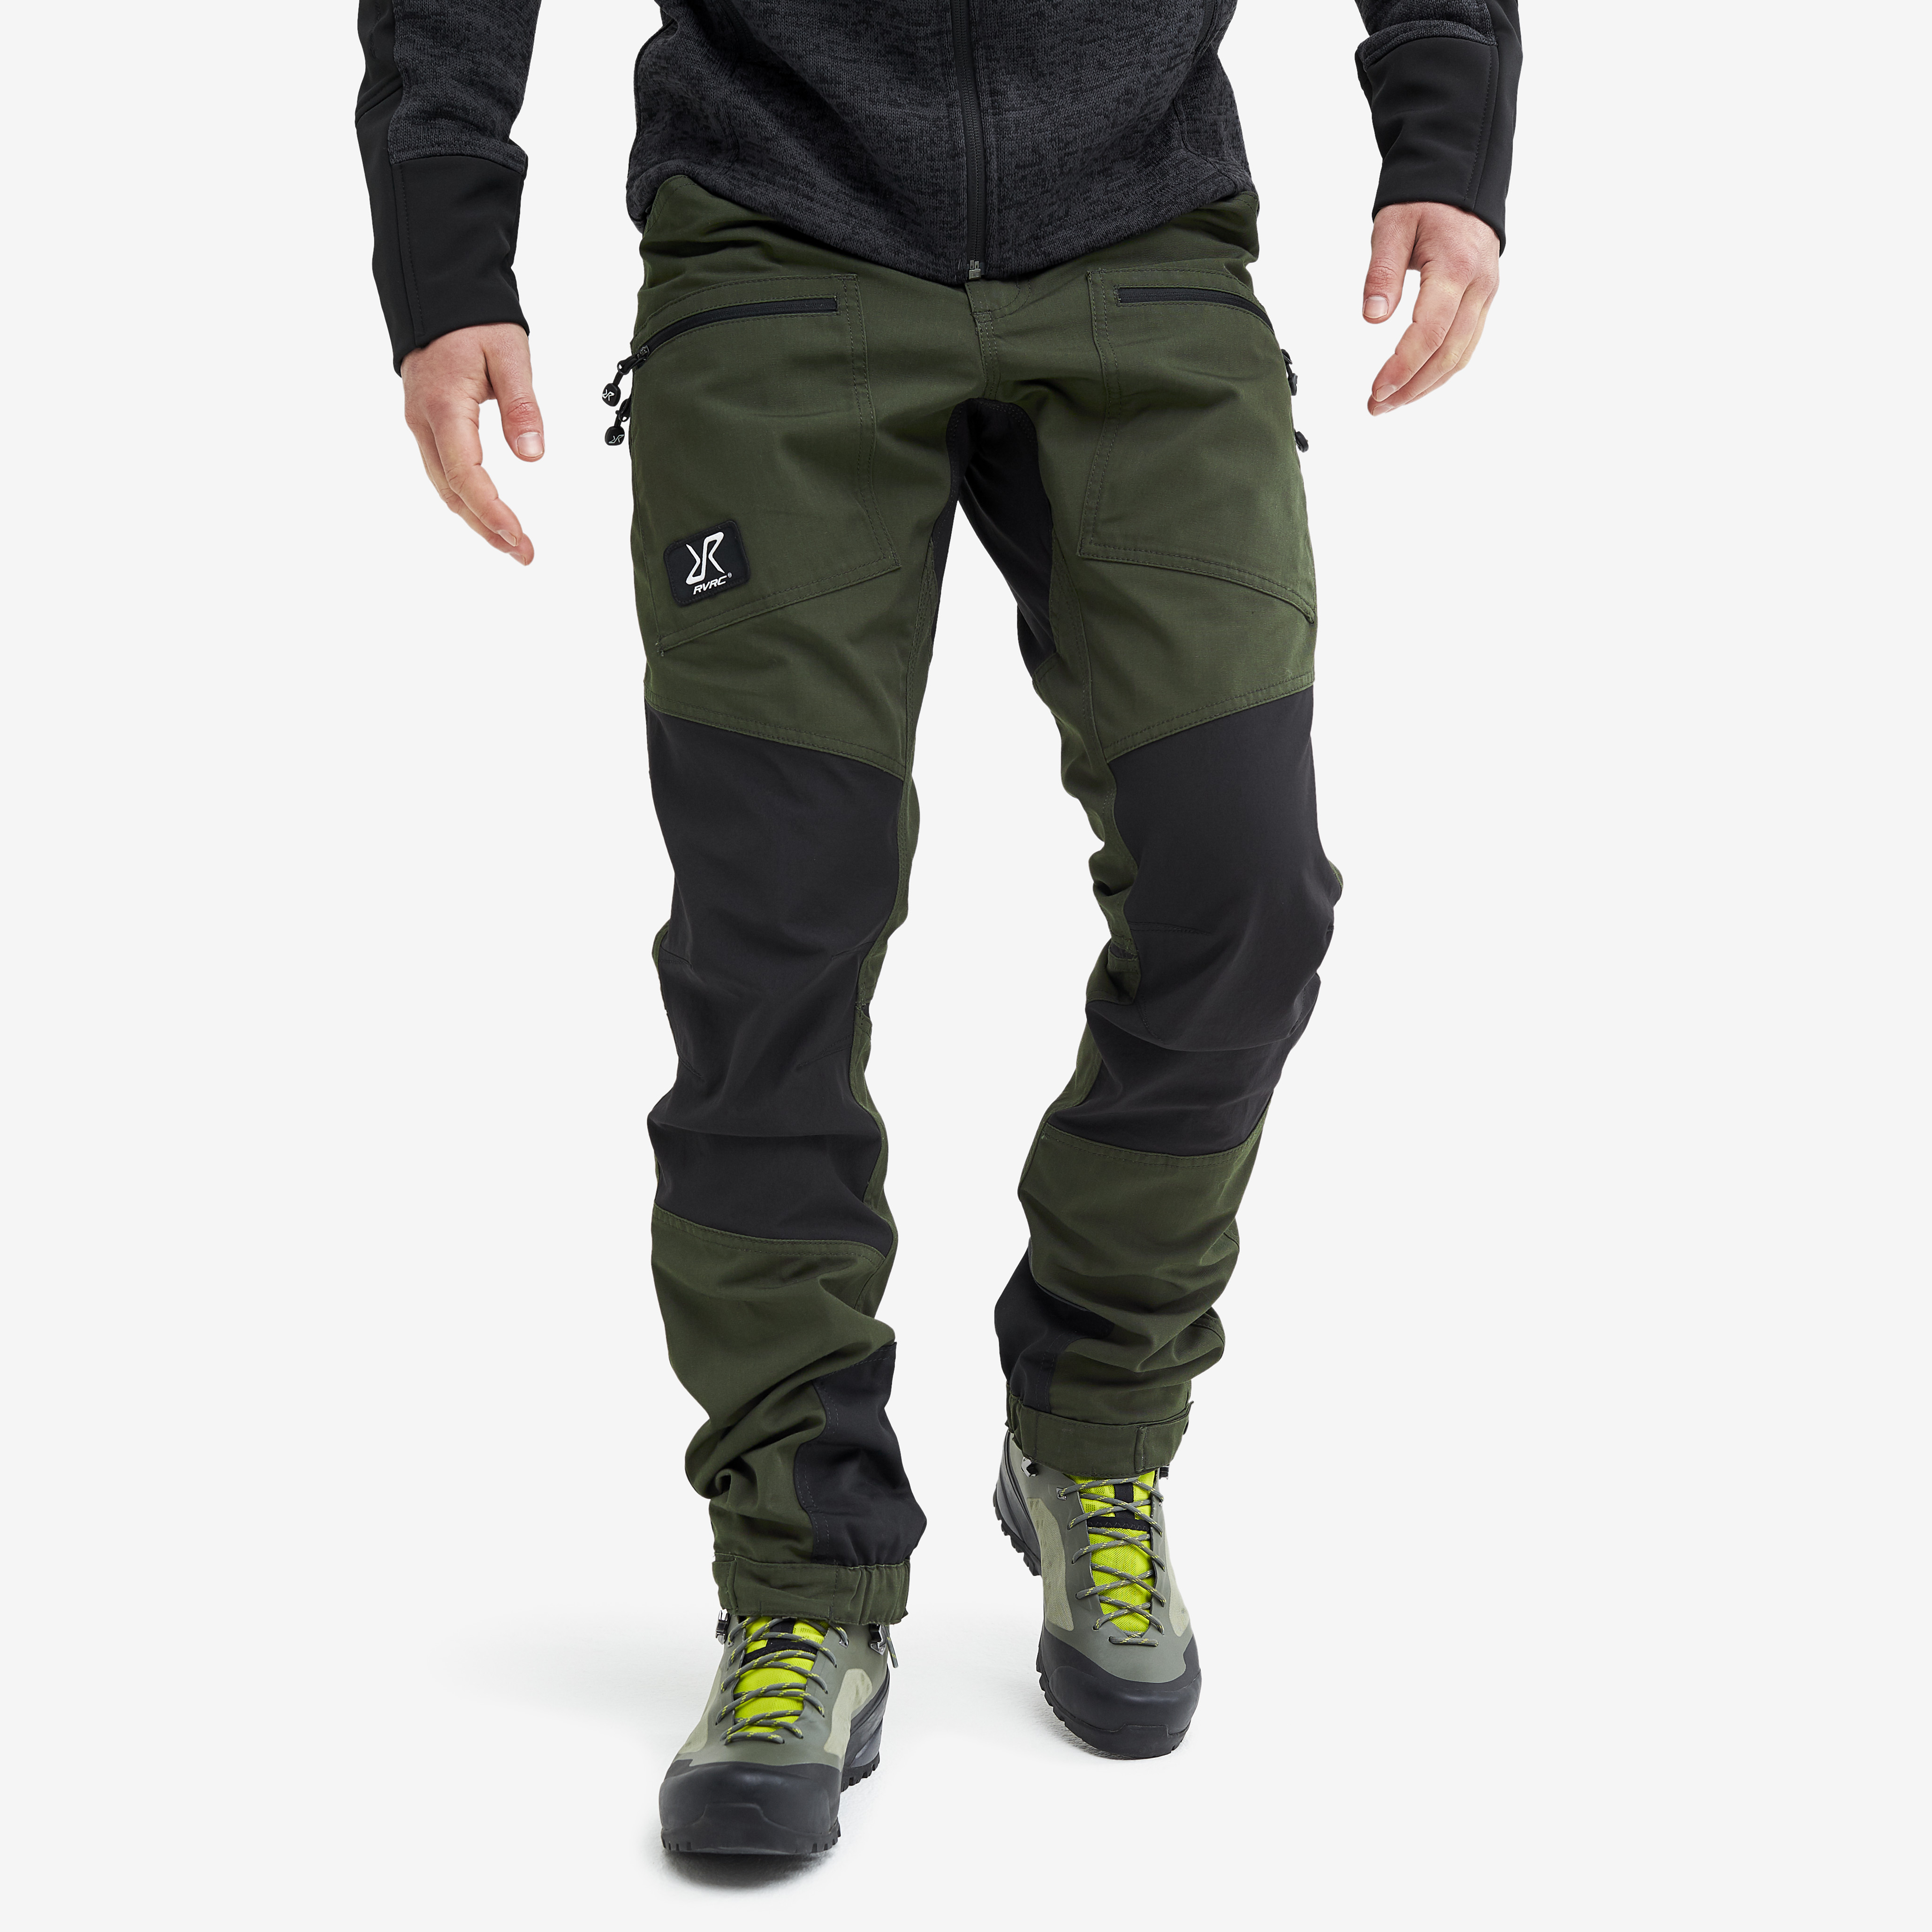 Nordwand Pro hiking trousers for men in green